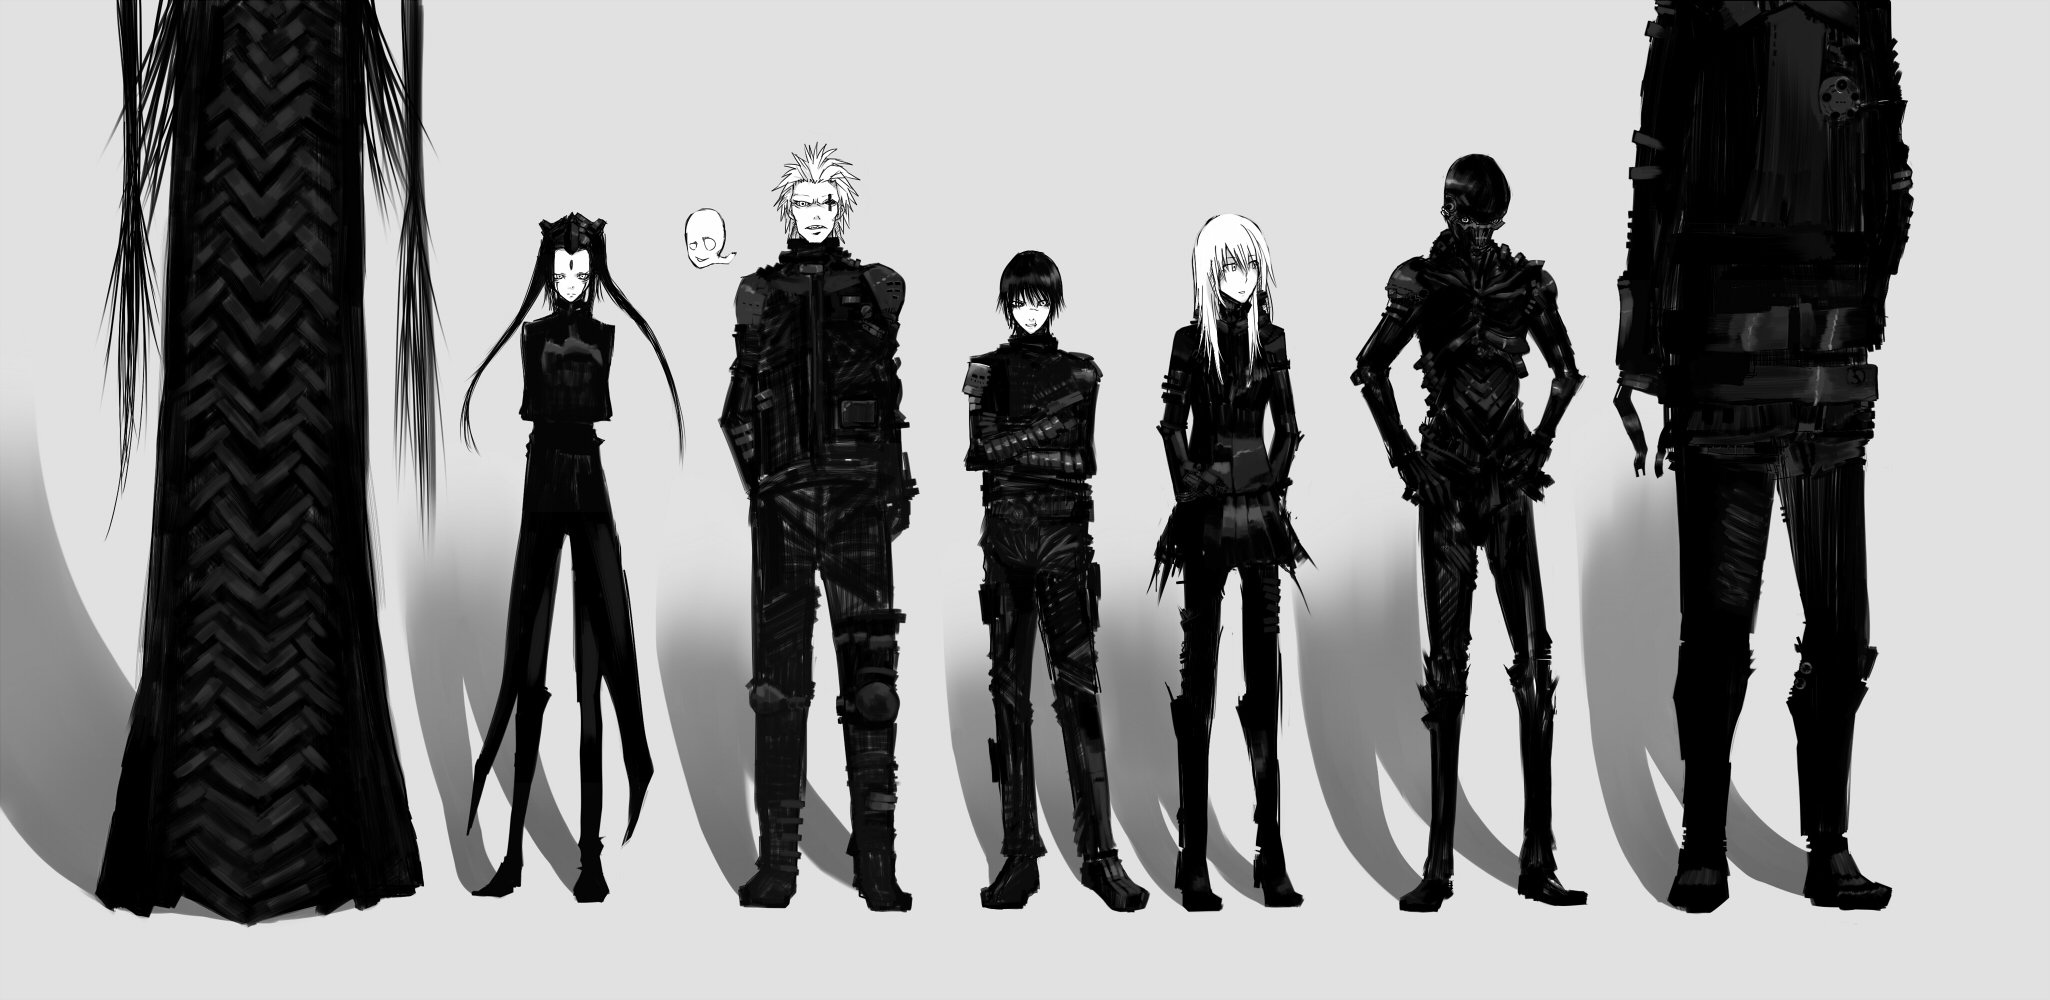 Cibo Killy Dhomochevsky Pcell Iko And 3 More Ghost In The Shell And 2 More Drawn By Saitou Yuu Danbooru